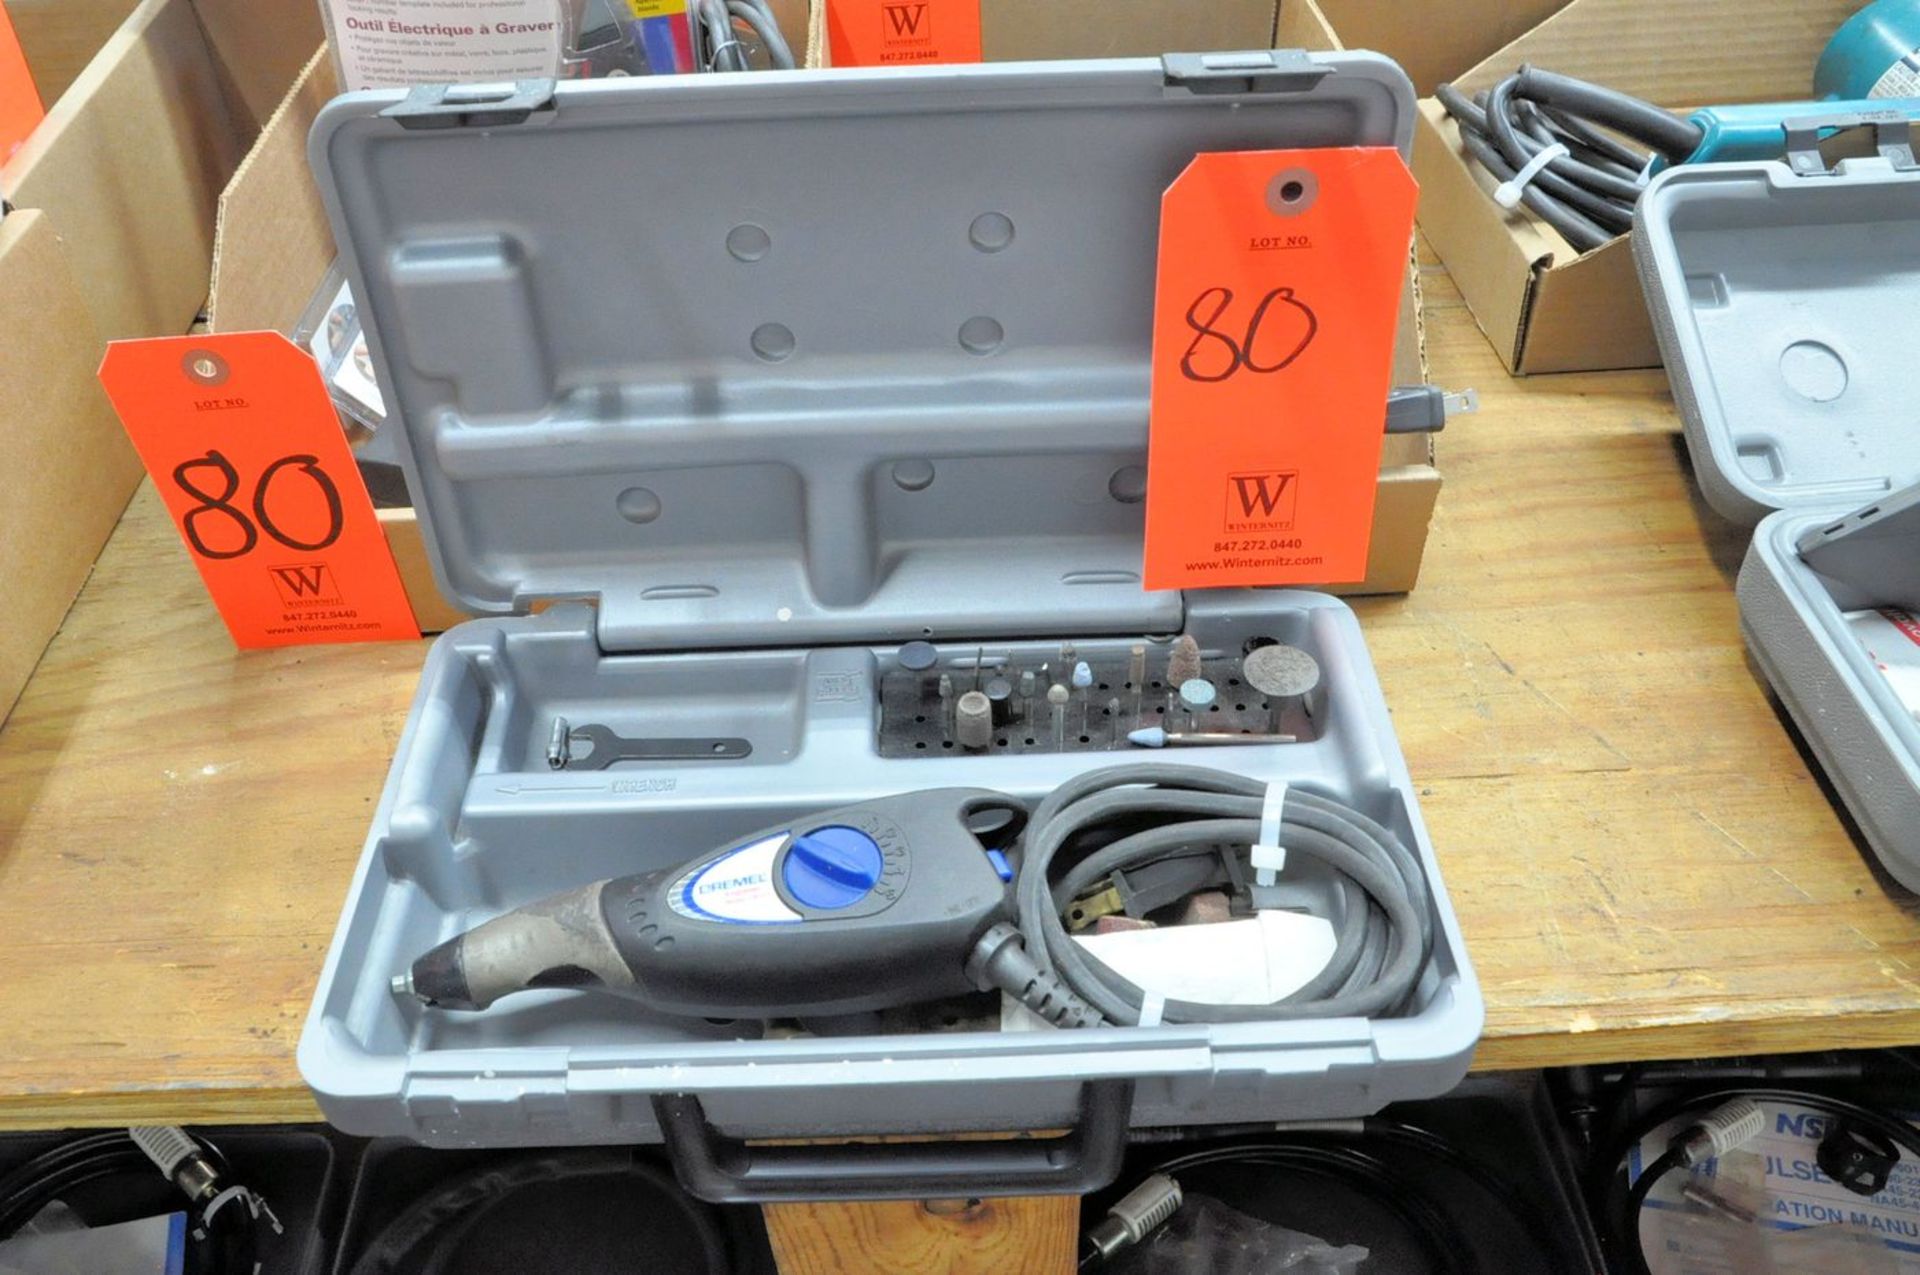 Lot - Dremel Electric Engravers with Electric Rotary Tools in (2) Boxes and (1) Case - Image 2 of 2